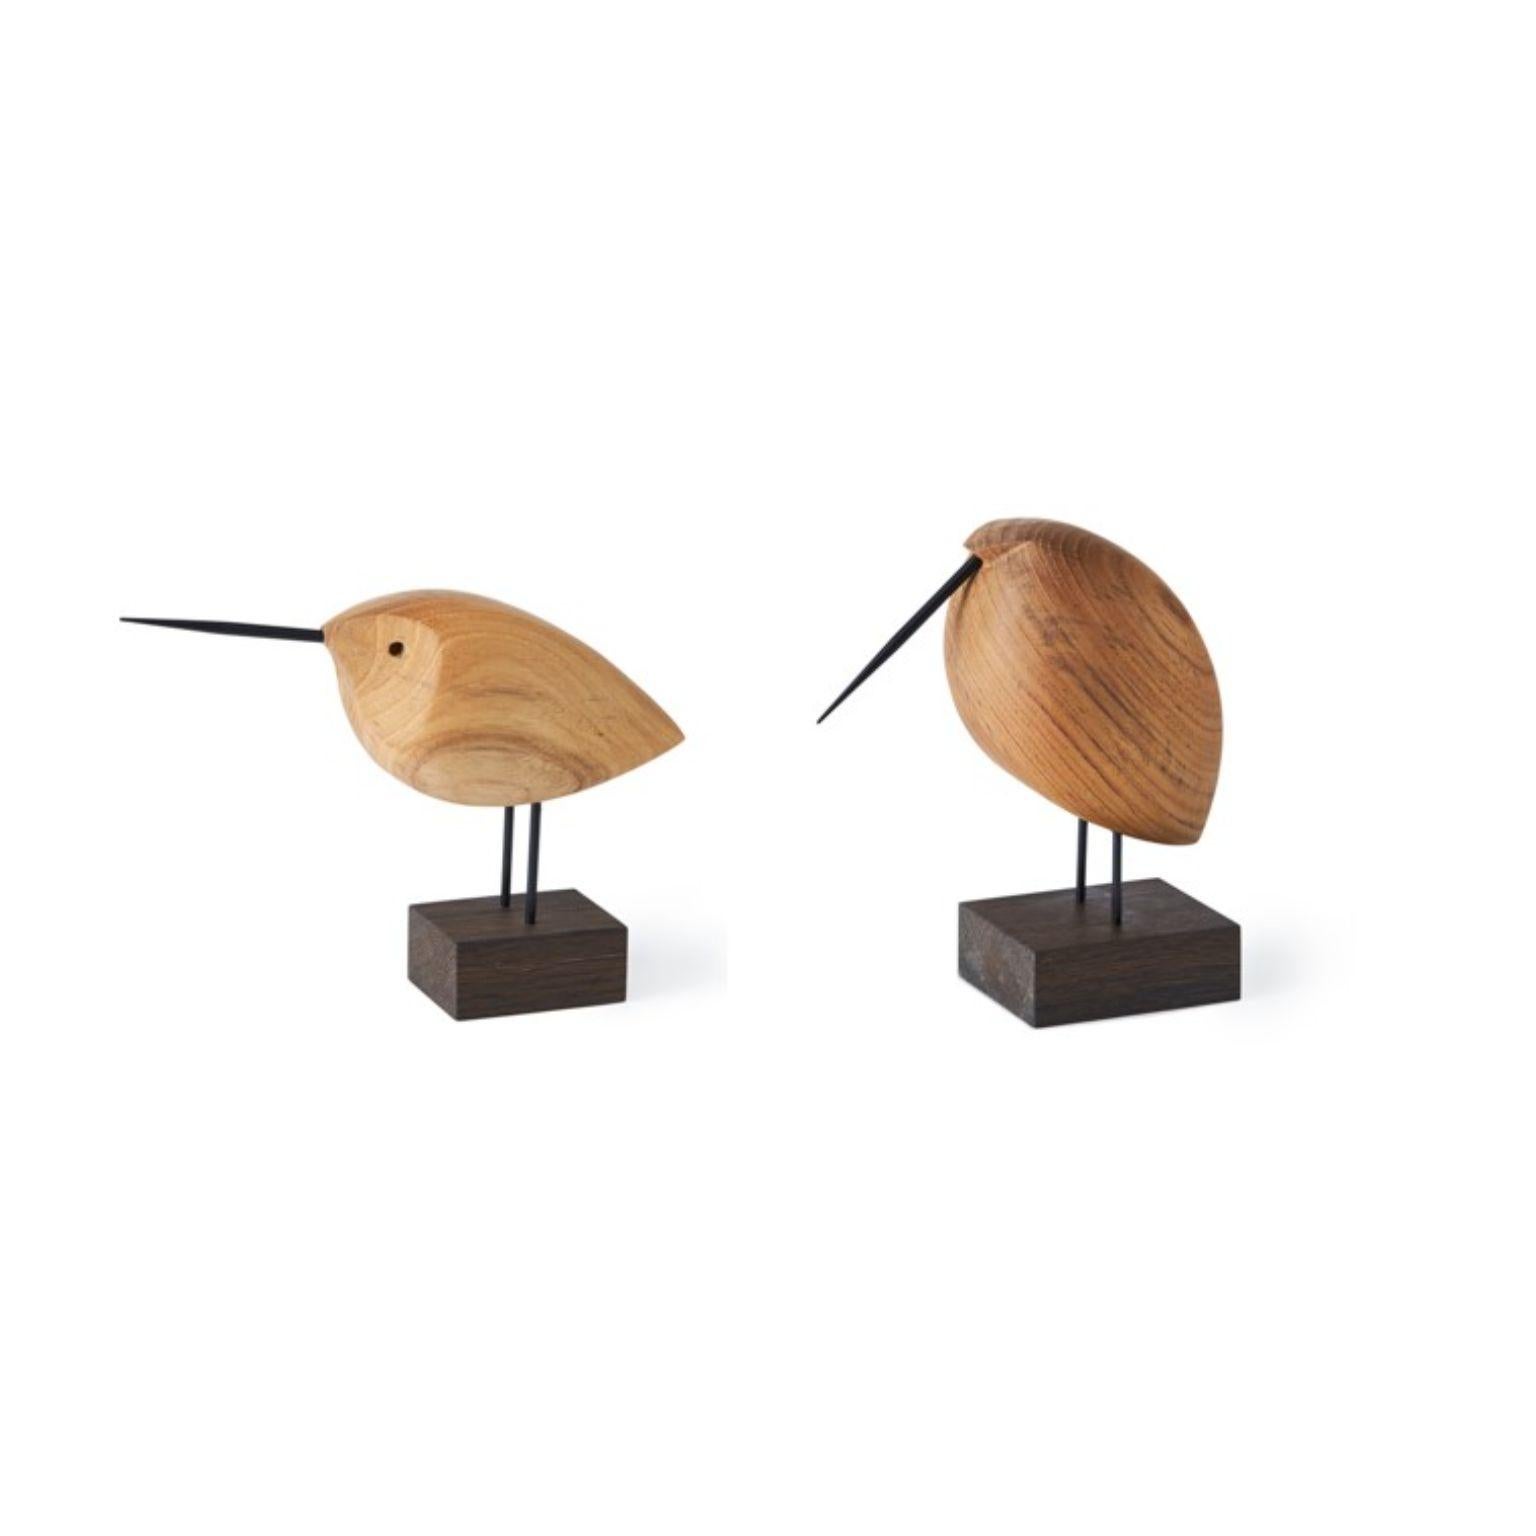 Set of 2 beak birds sculptures by Warm Nordic
Dimensions: 
Awake: D18,5 x W5,5 x H13 cm
Lazy: D14 x W7,5 x H15,5 cm
Material: Oiled Oak
Weight: 0.9 / 0.3 kg 
Also available in different variations. Please contact us.

Designed by Svend Aage